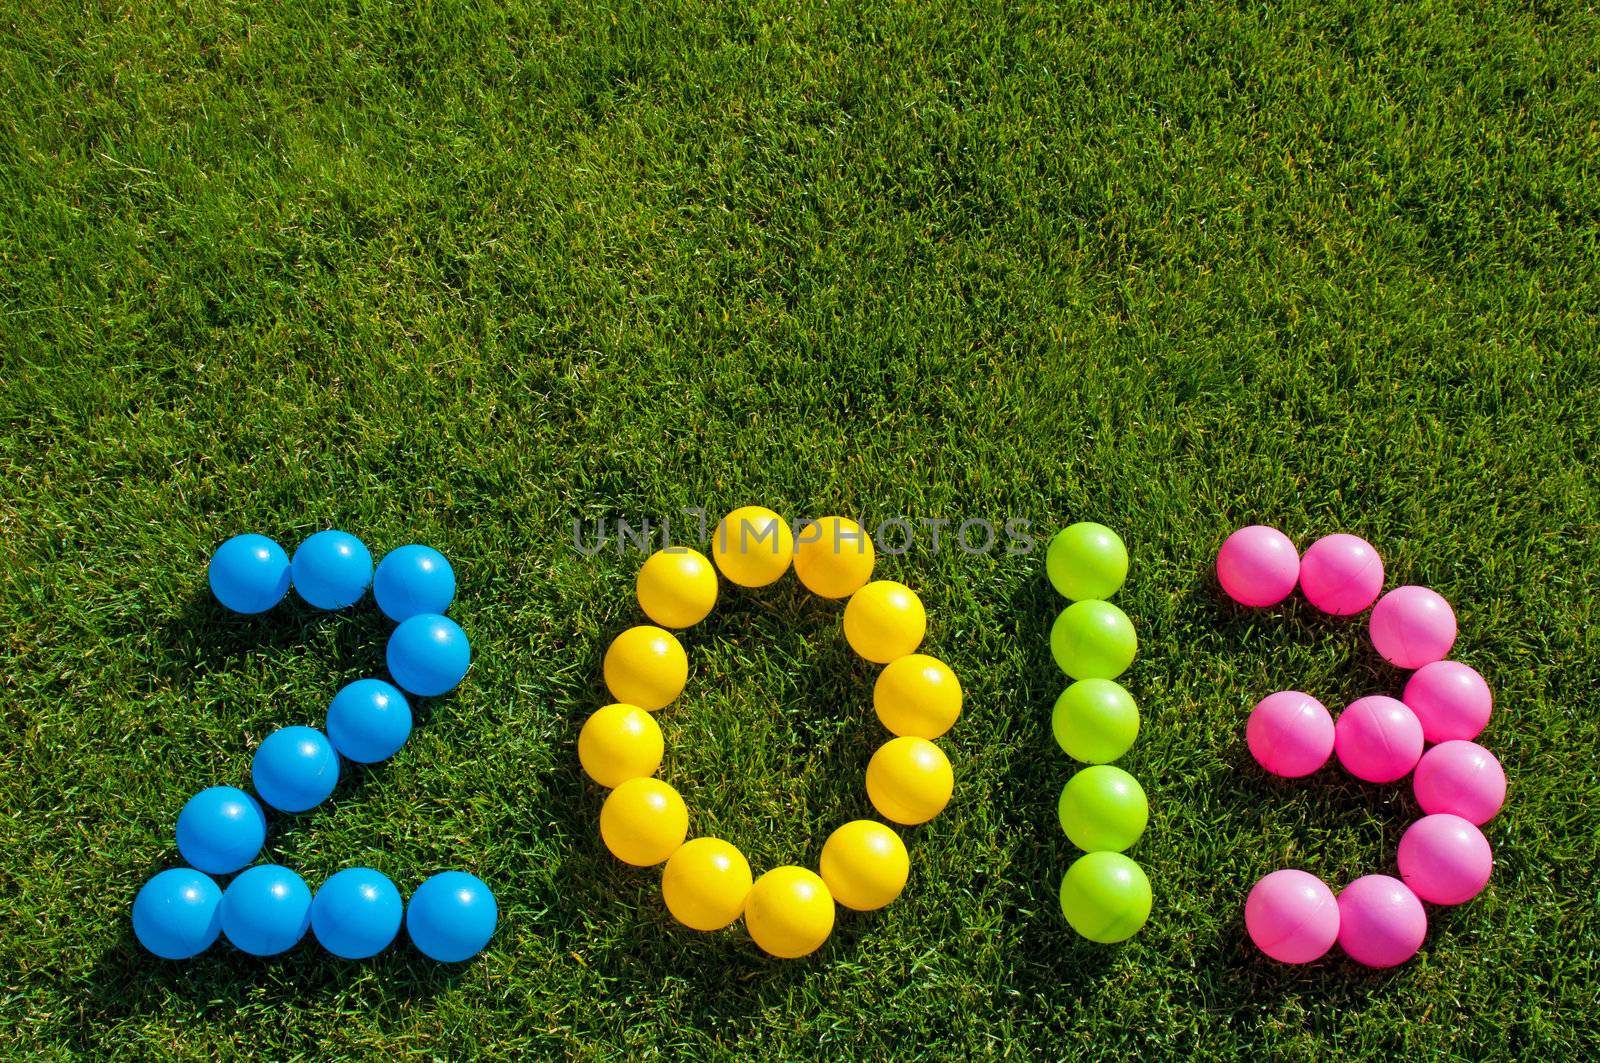 Happy New Year 2013 against a green grass background